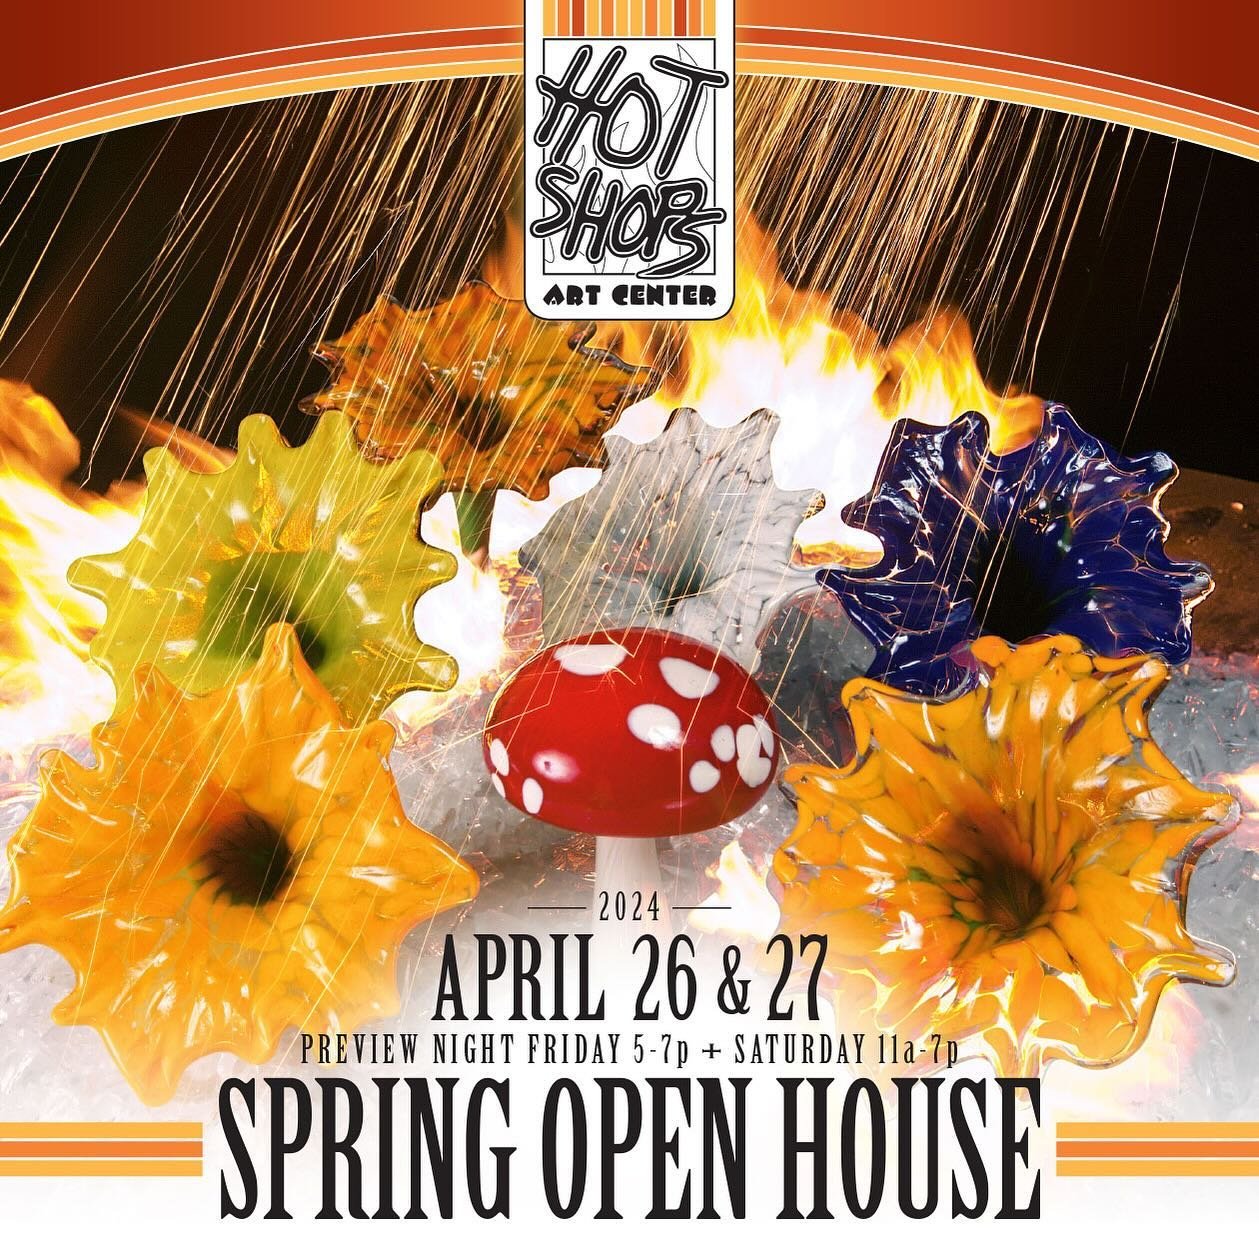 For the upcoming @hotshopsartcenter open house, guest artist @darcyhornbeadwork will join me on Saturday with beaded jewelry and plant stakes. She&rsquo;s showing one day only, so pop into my second-floor space to catch her and her beautiful beadwork